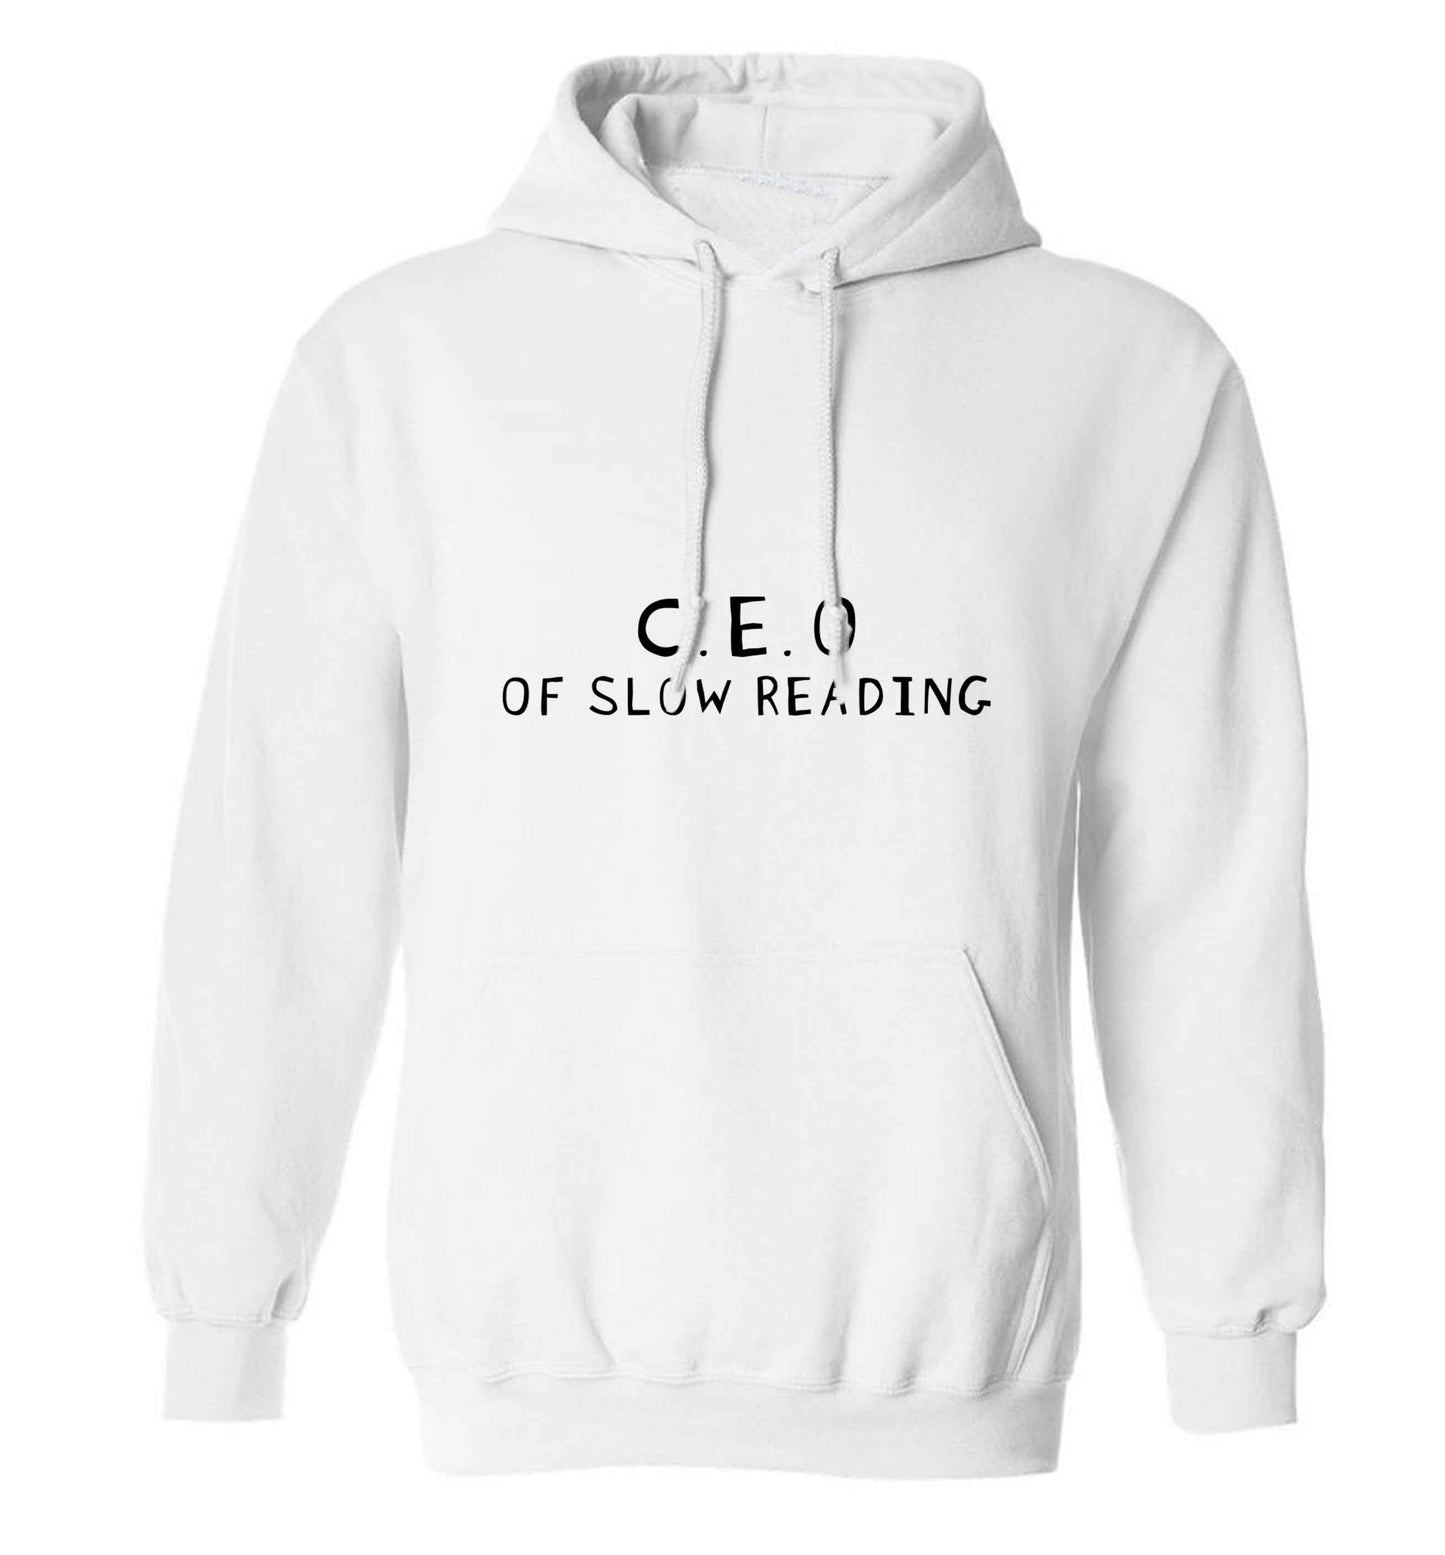 We love this for YOU! Who else loves saying this?!  adults unisex white hoodie 2XL